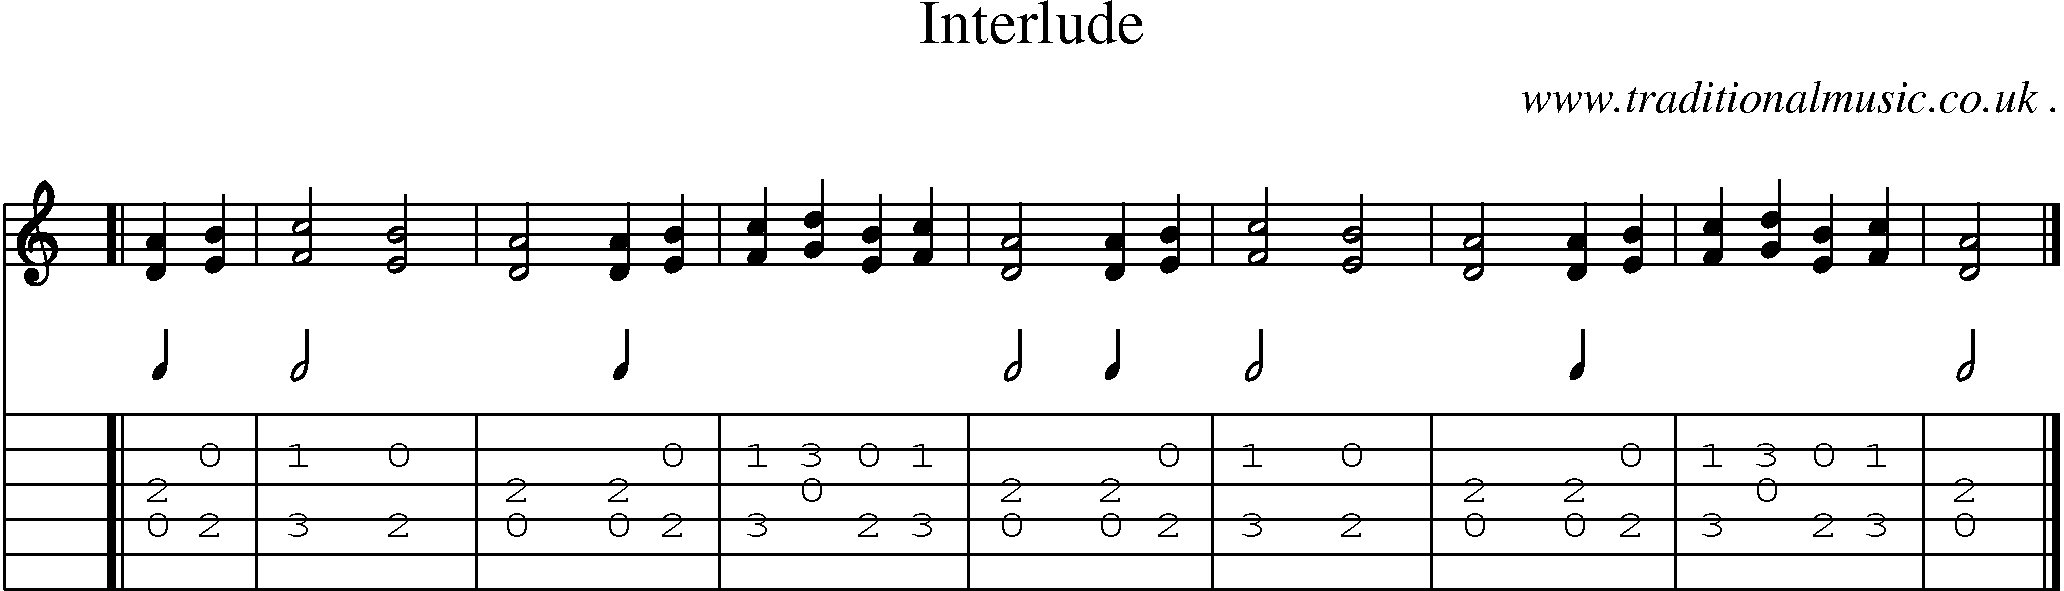 Sheet-music  score, Chords and Guitar Tabs for Interlude